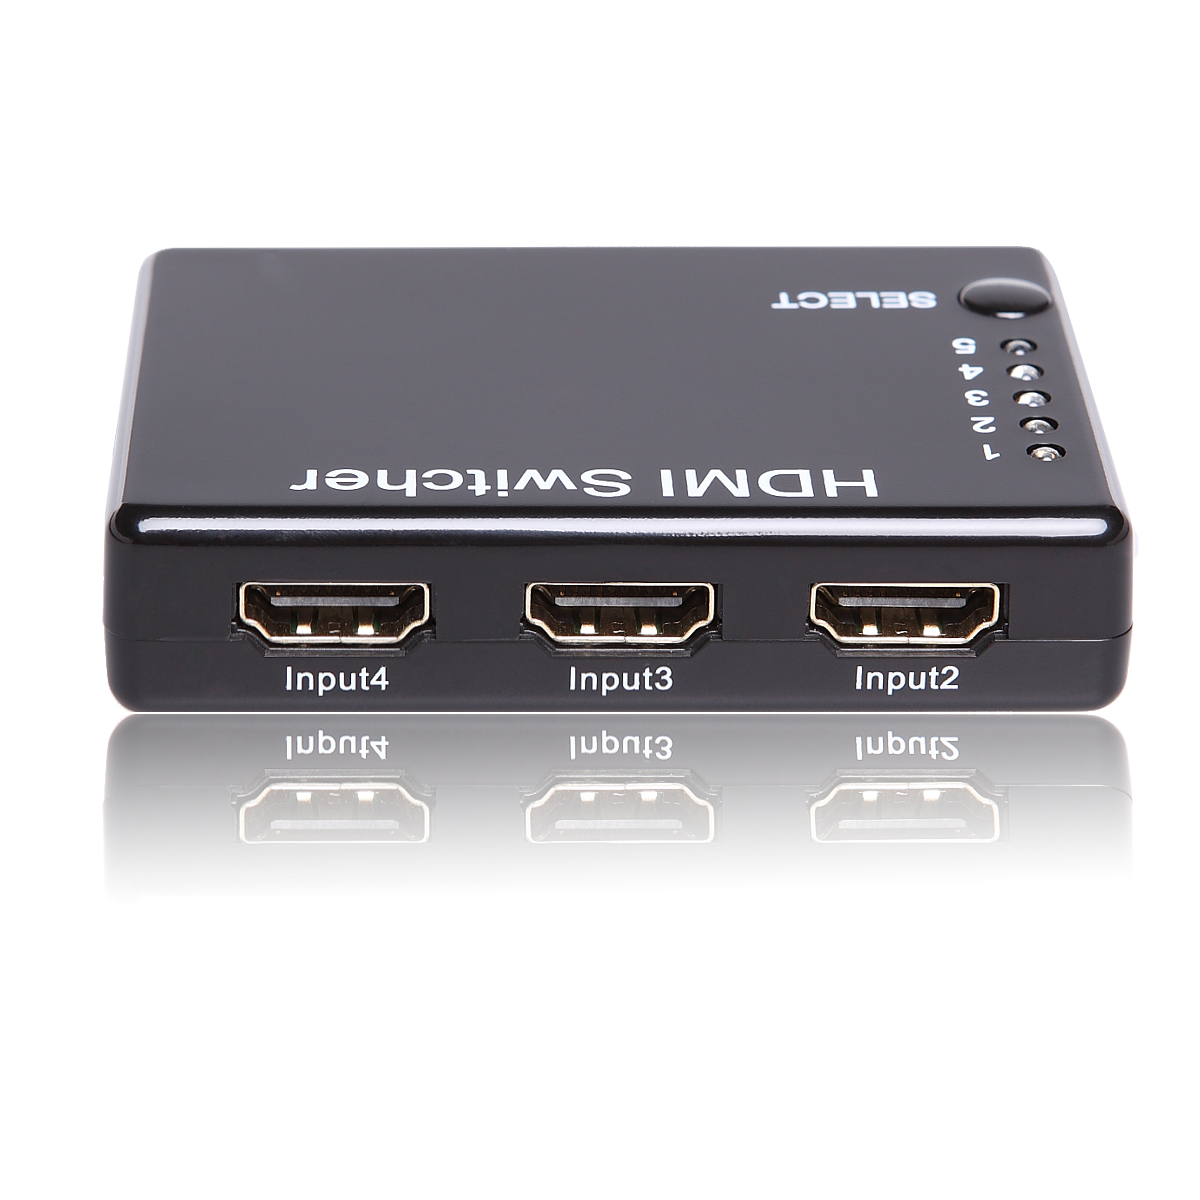 Compatible with any HDMI devices such as PS3, PS4, XBox 360, xBox One, Wii U, satellite set top box, HD AV Receiver, HD DVR systems, Chromecast, Roku, Amazon Fire TV, Apple TV, and HD DVD Bluray, home theater projector, PC monitor as well as any other HDMI compatible devices.